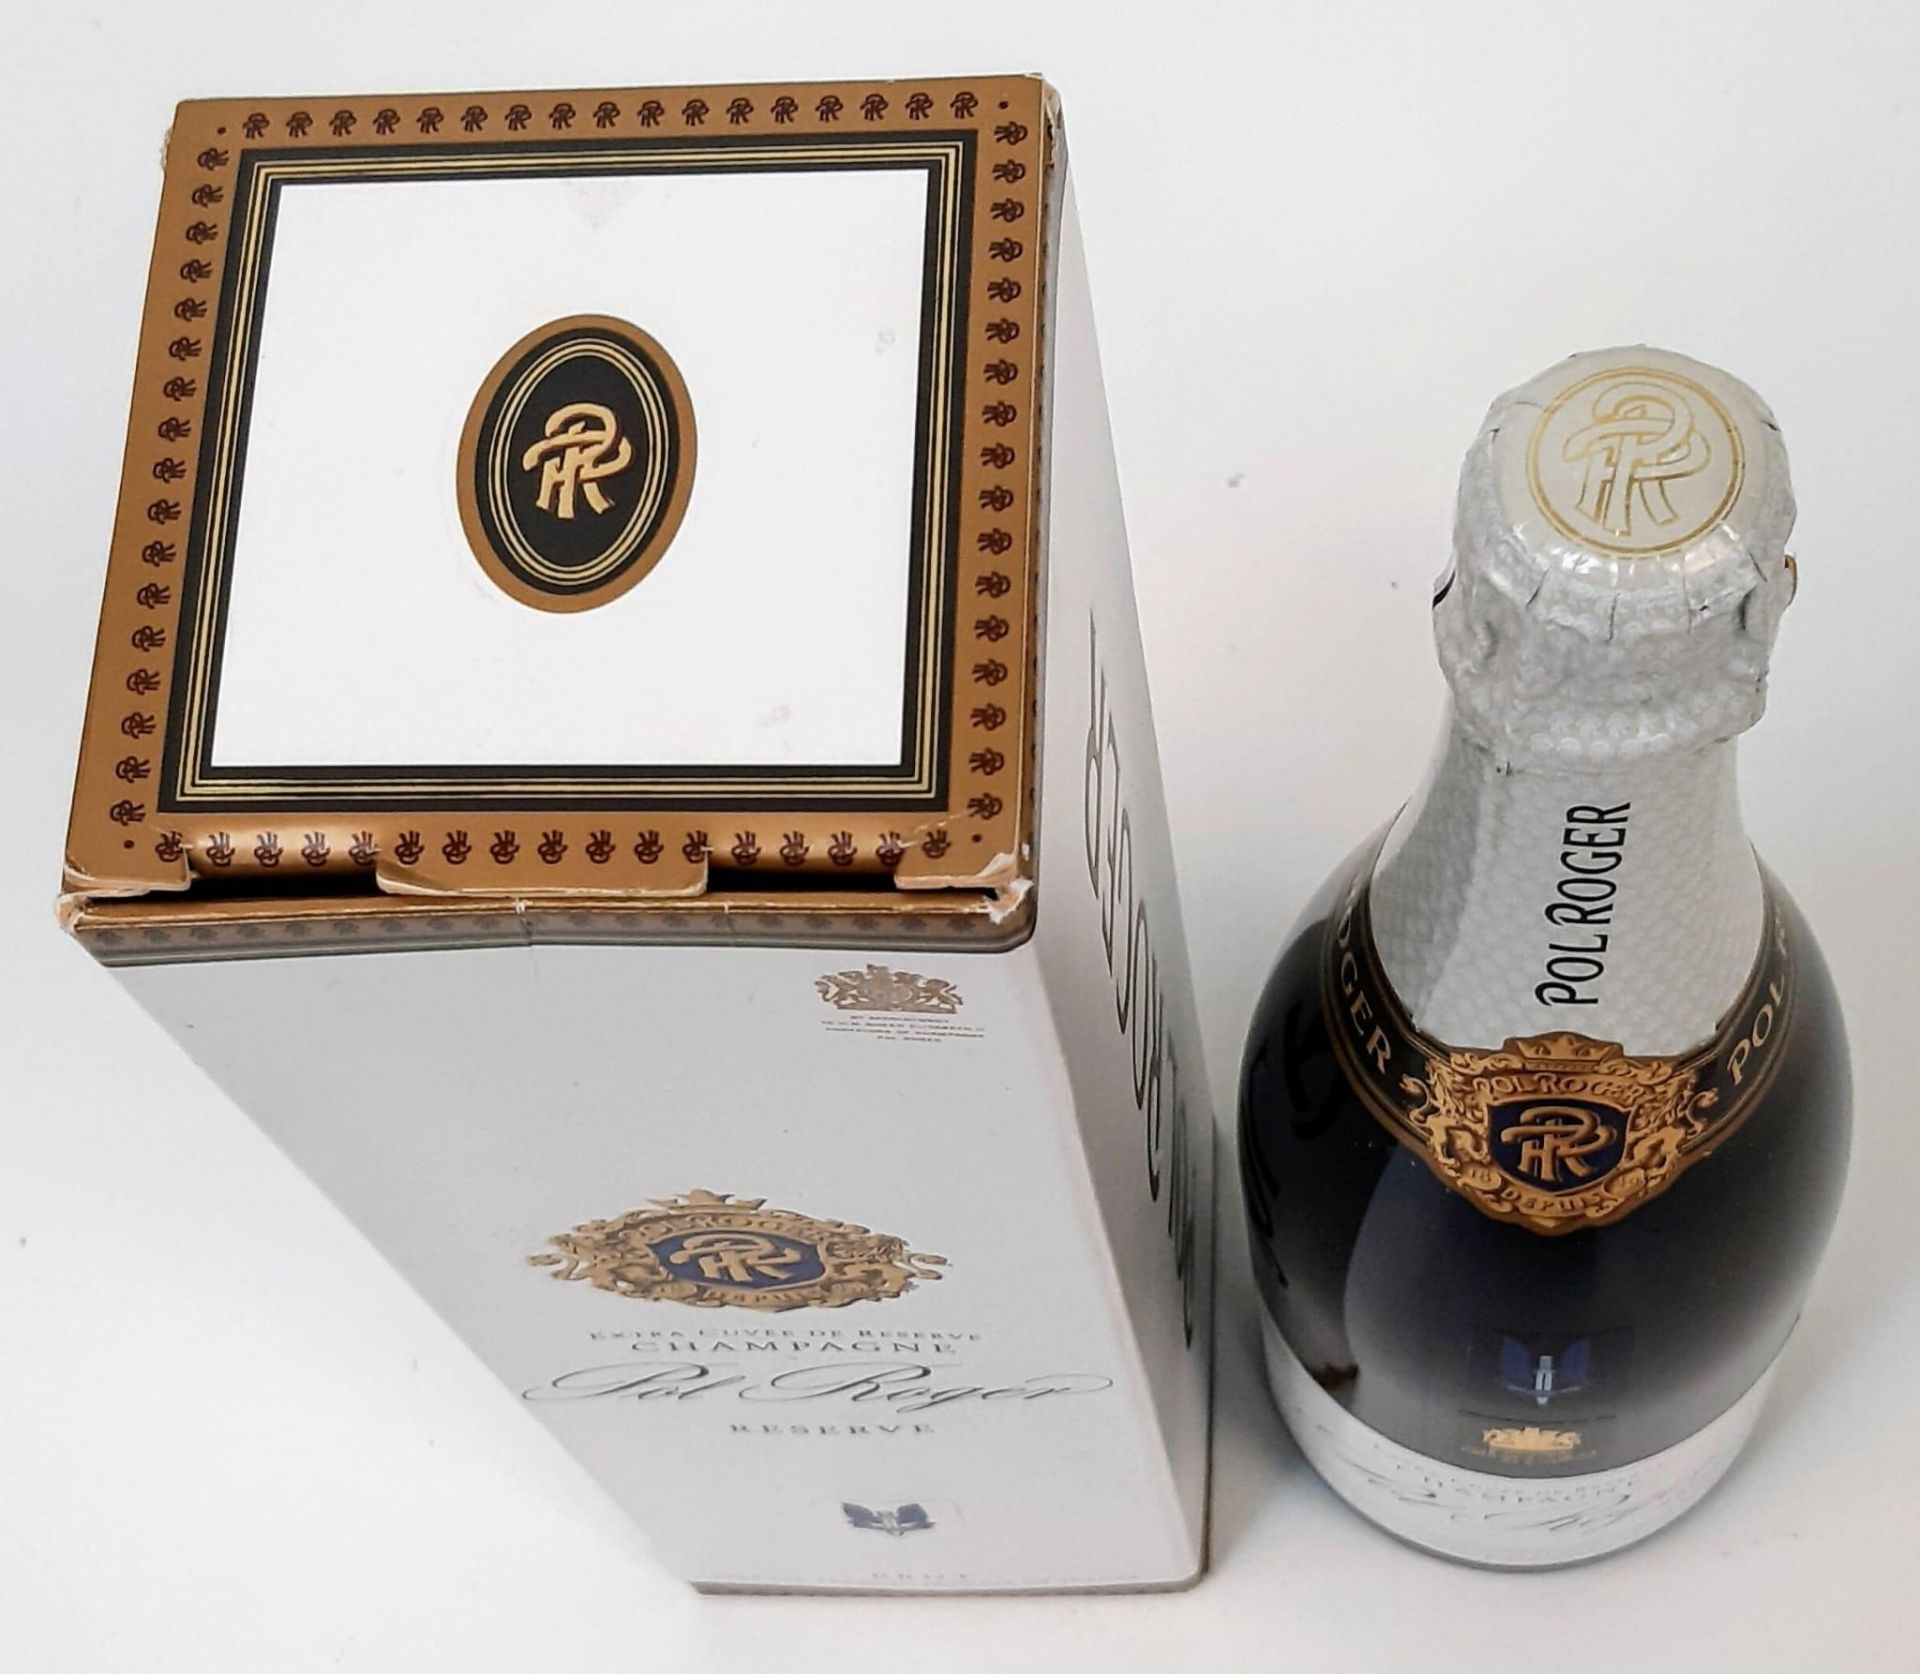 A Rare Bottle of ‘SAS’ emblem Pol Roger Reserve Champagne as donated by 22 SAS to a Military Charity - Image 3 of 3